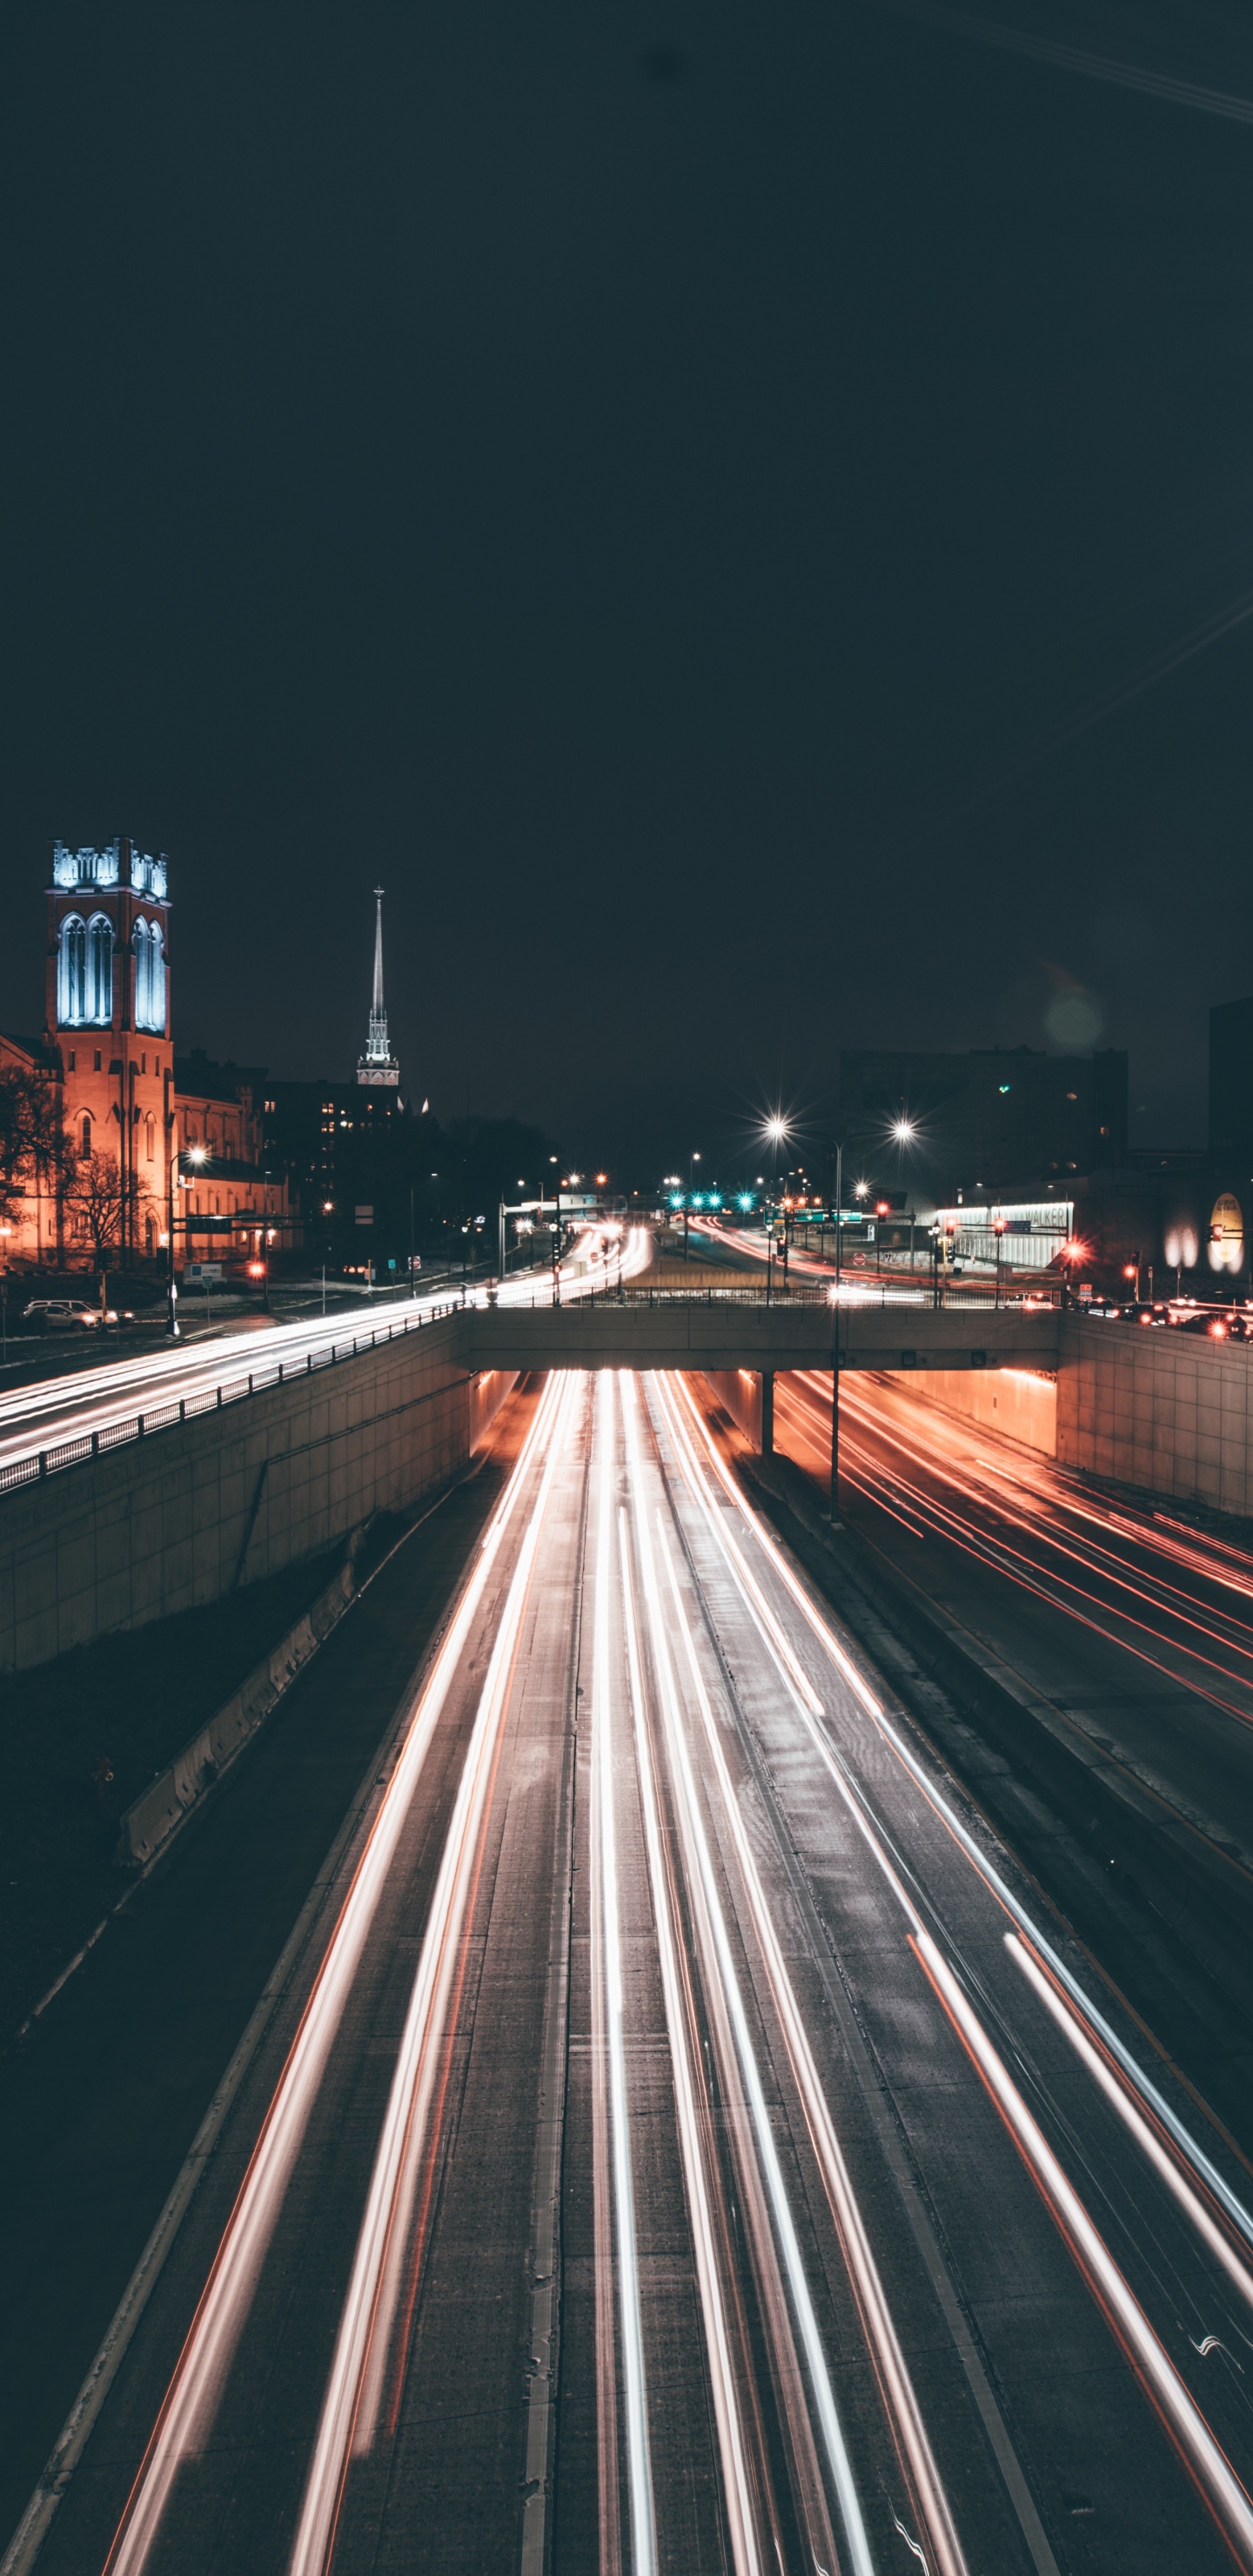 Time Lapse Photography of Cars on Road During Night Time. Wallpaper in 1440x2960 Resolution